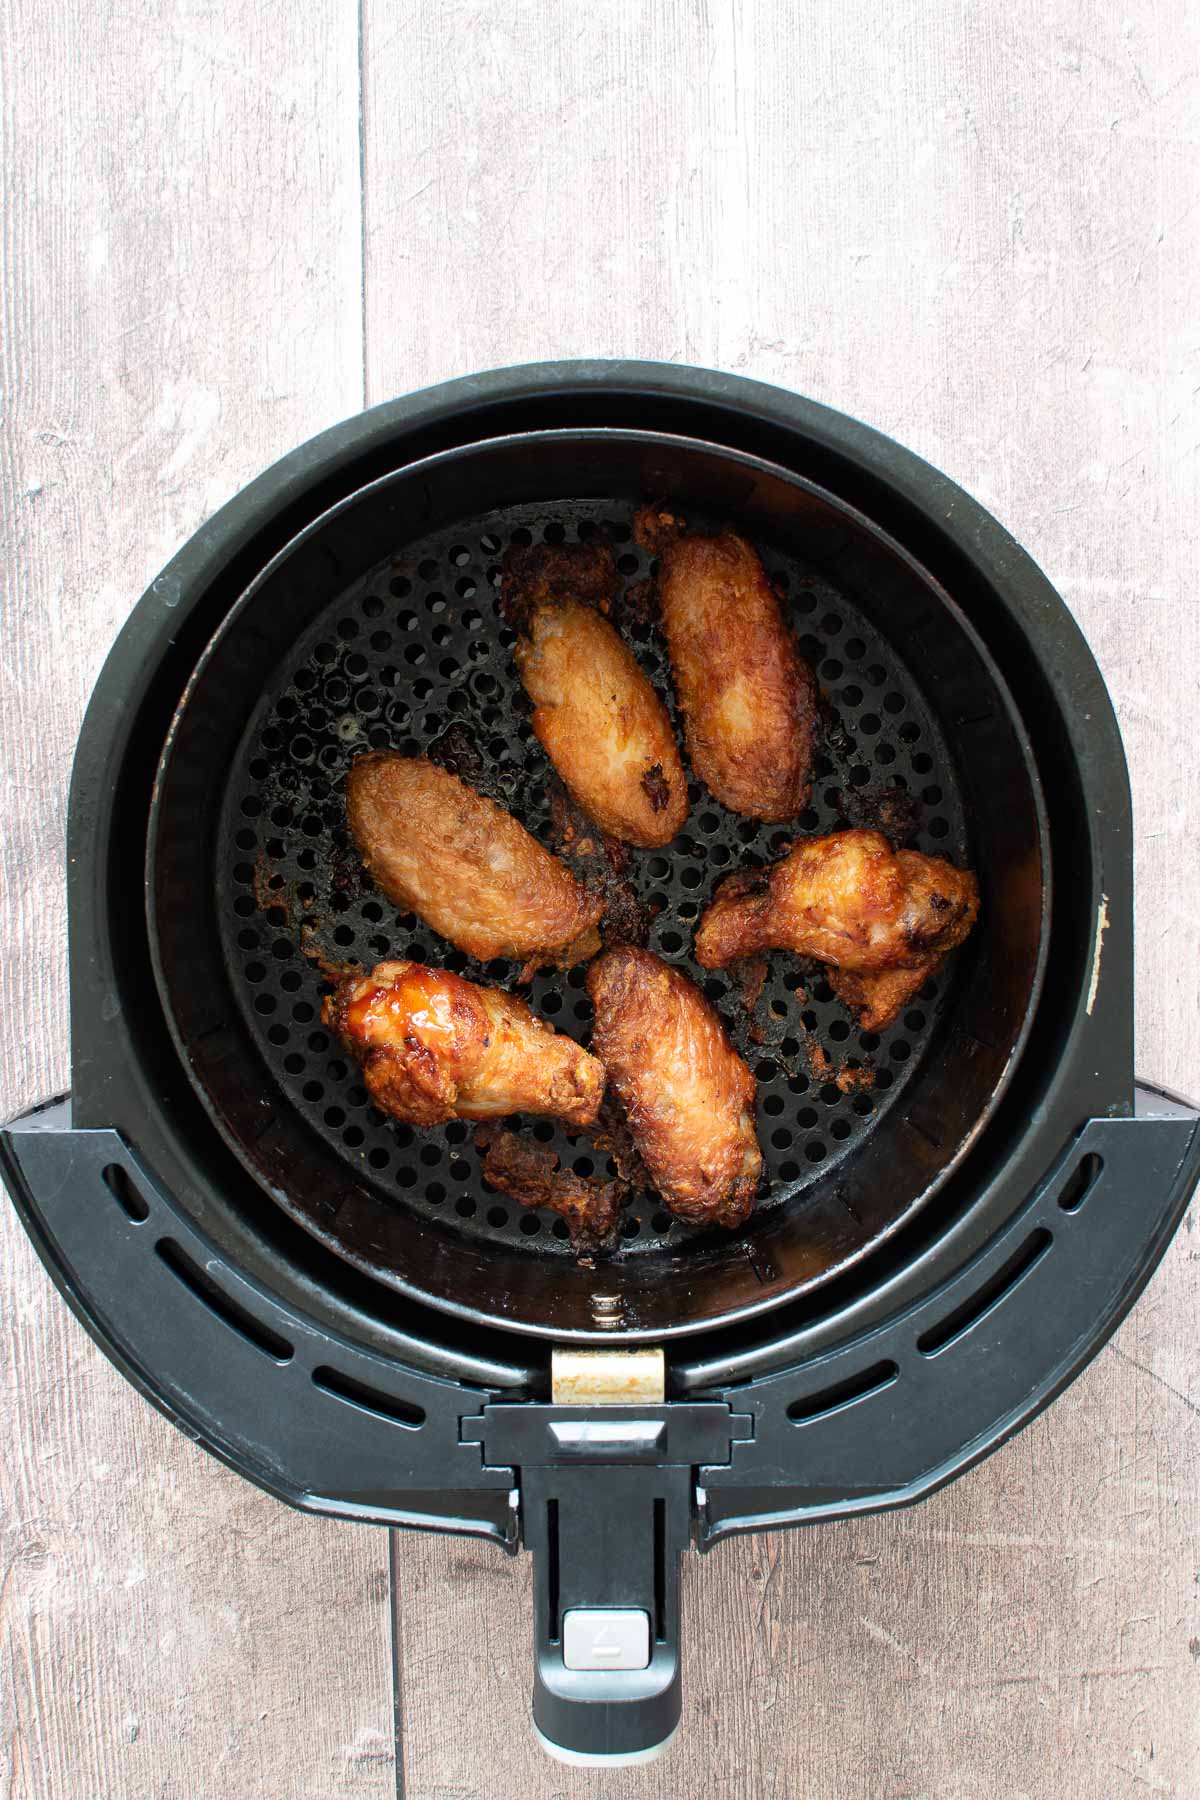 Cooked chicken wings in an air fryer.